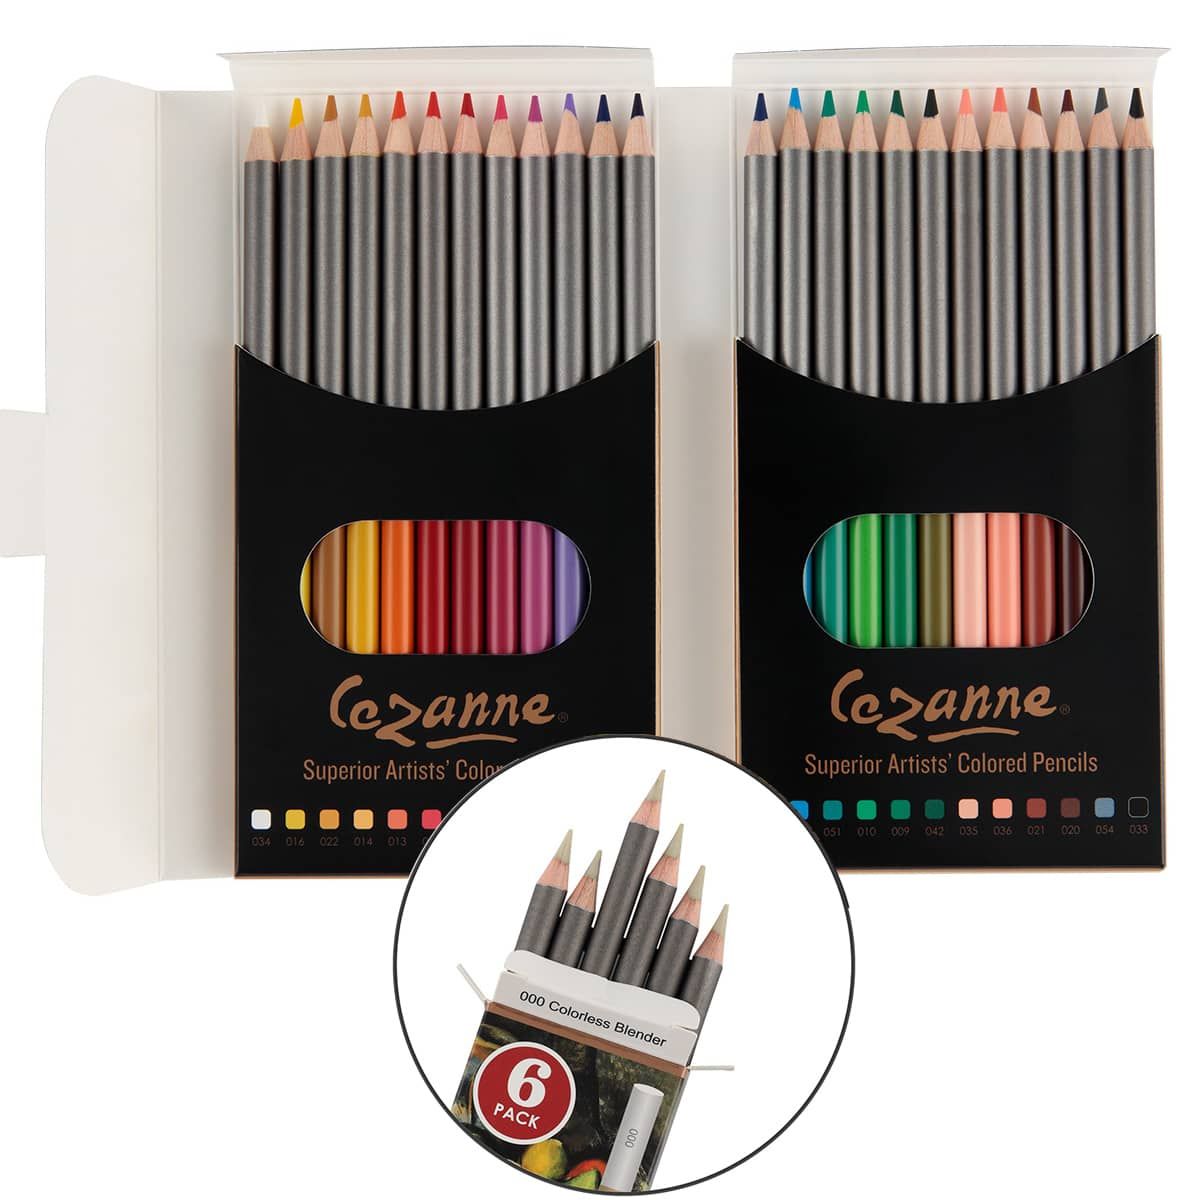 Cezanne Colored Pencils Set of 24 with 6 Colorless Blenders